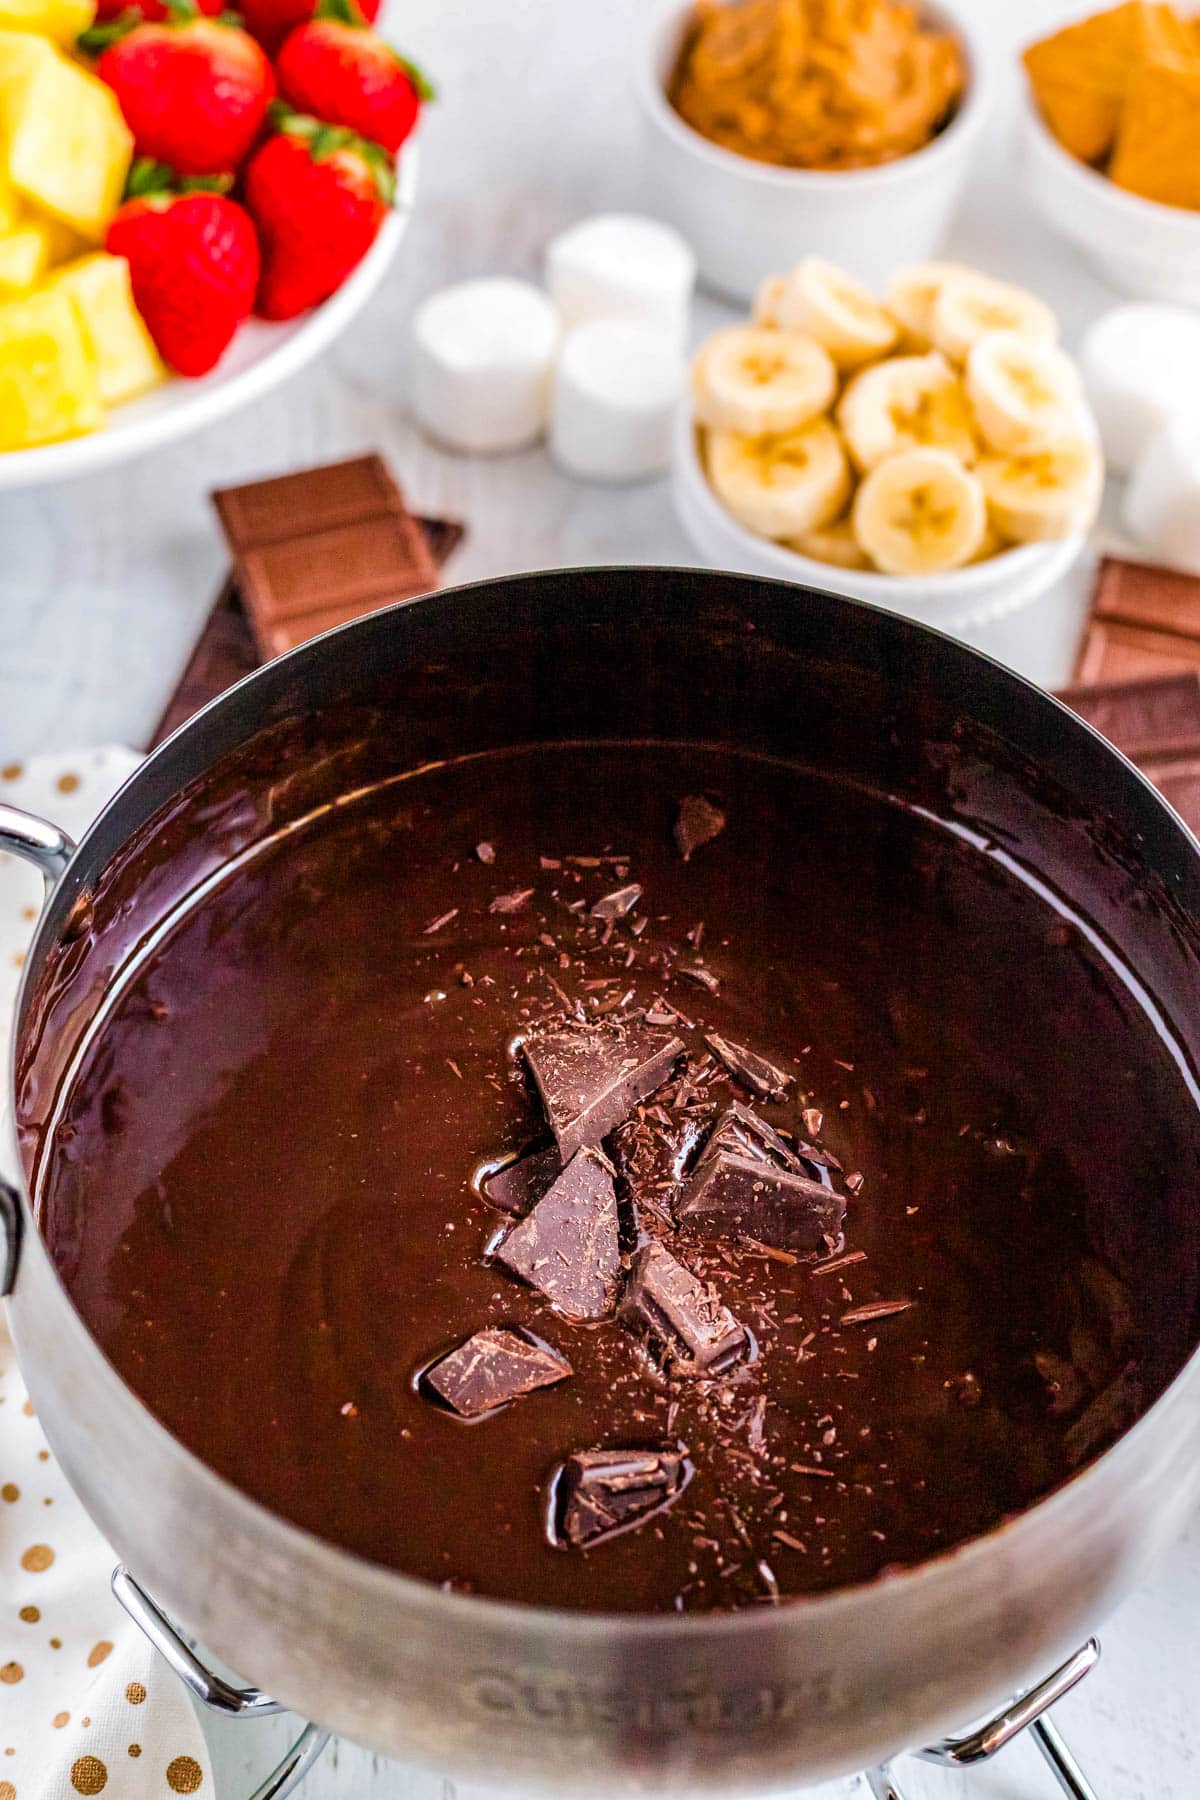 Chocolate being added to the fondue.